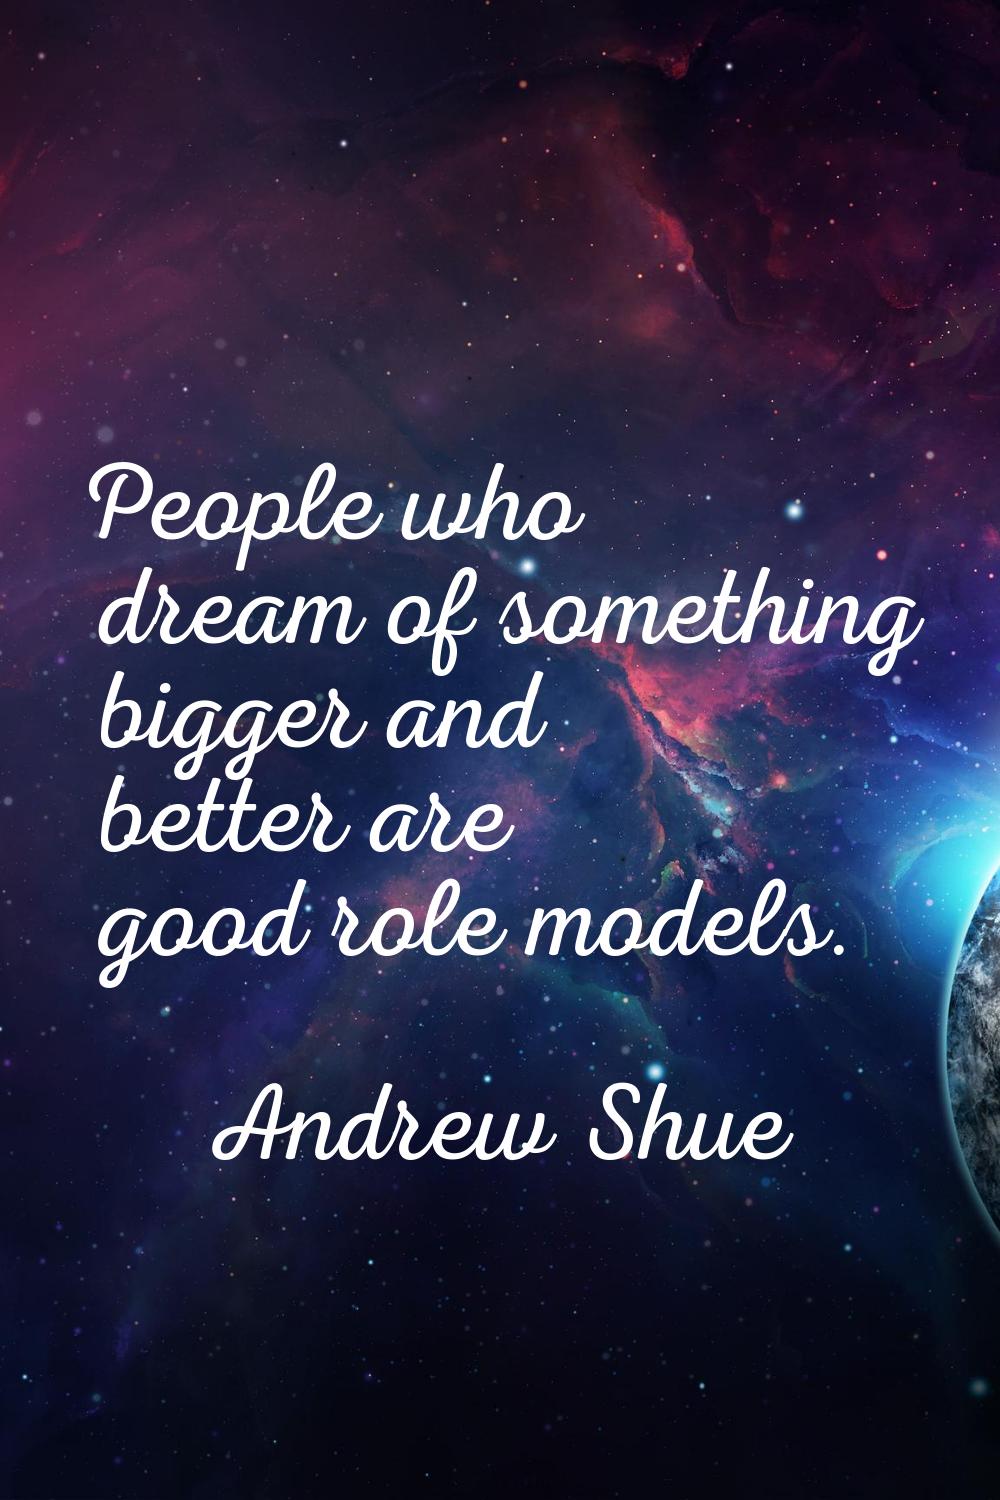 People who dream of something bigger and better are good role models.